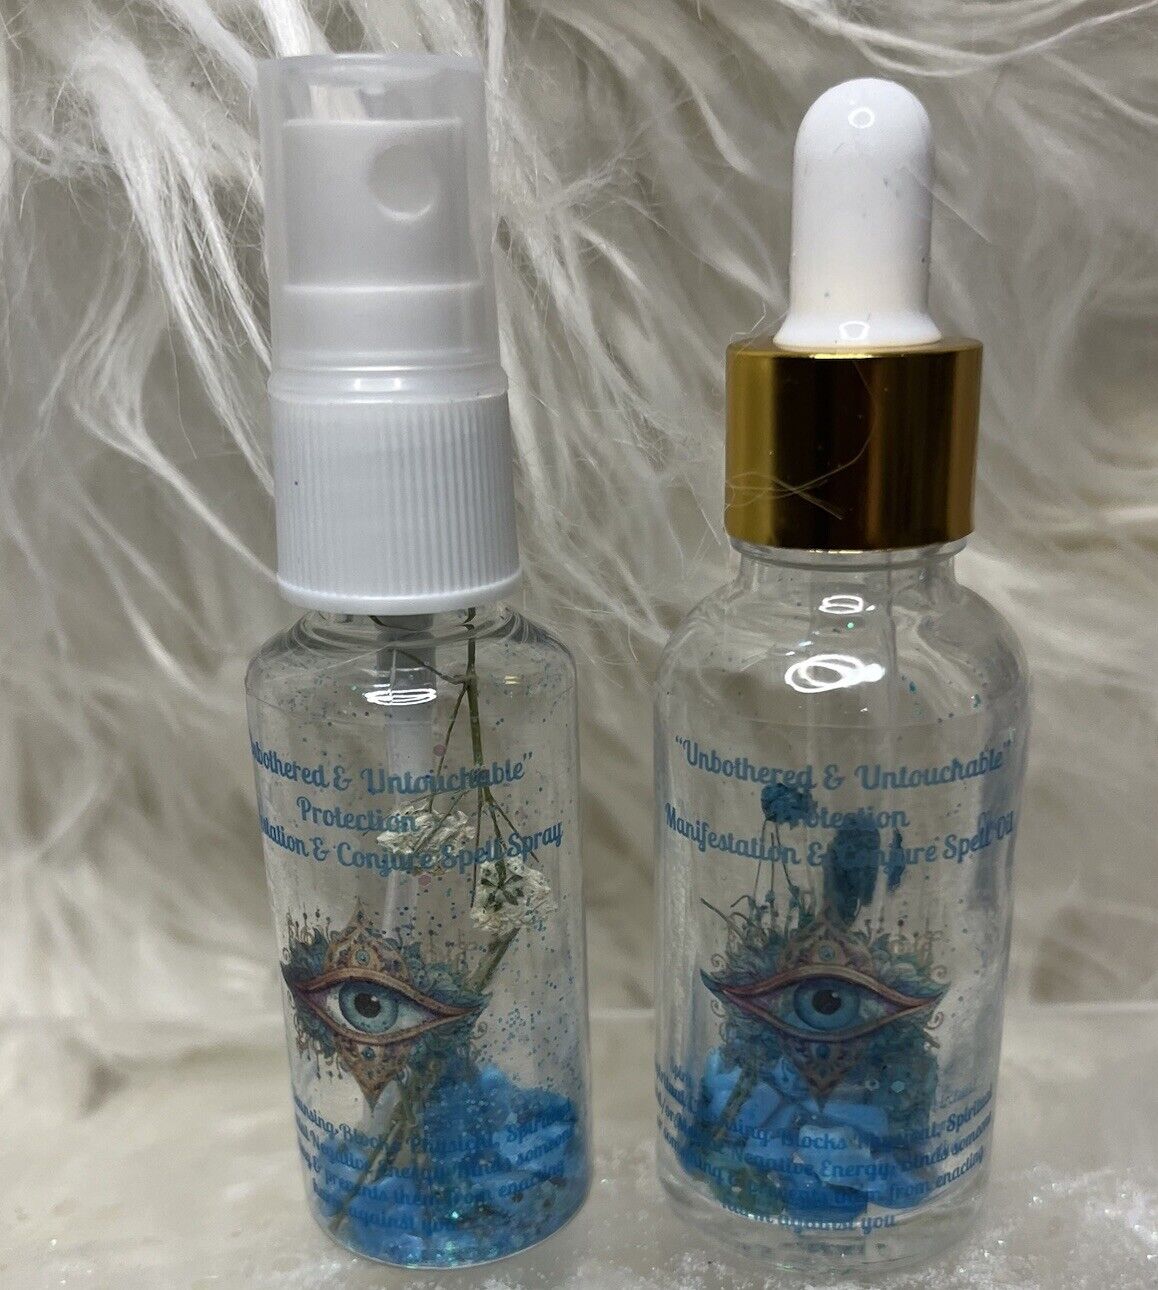 “UNBOTHERED”•PROTECTION•Manifestation & Conjure Spell Ritual Oil•1oz. BOTTLE